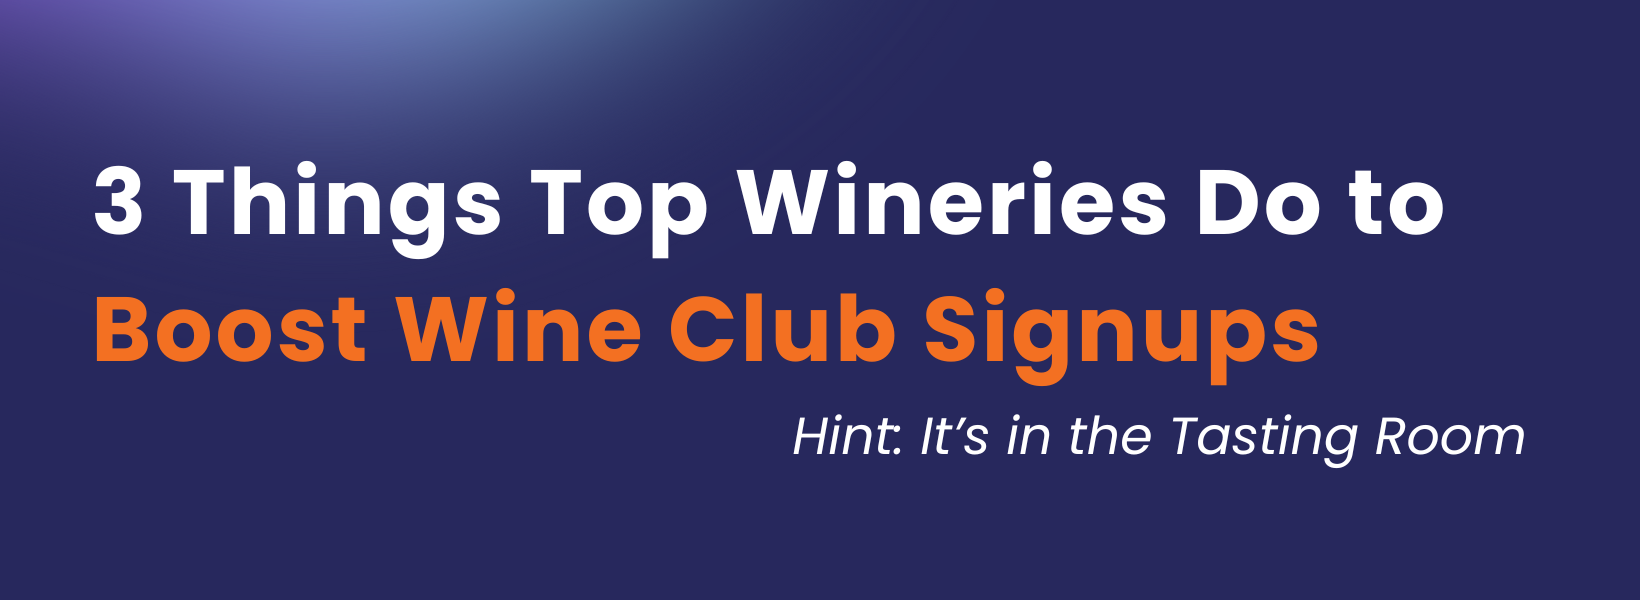 3 Things Top Wineries Do to Boost Wine Club Signups